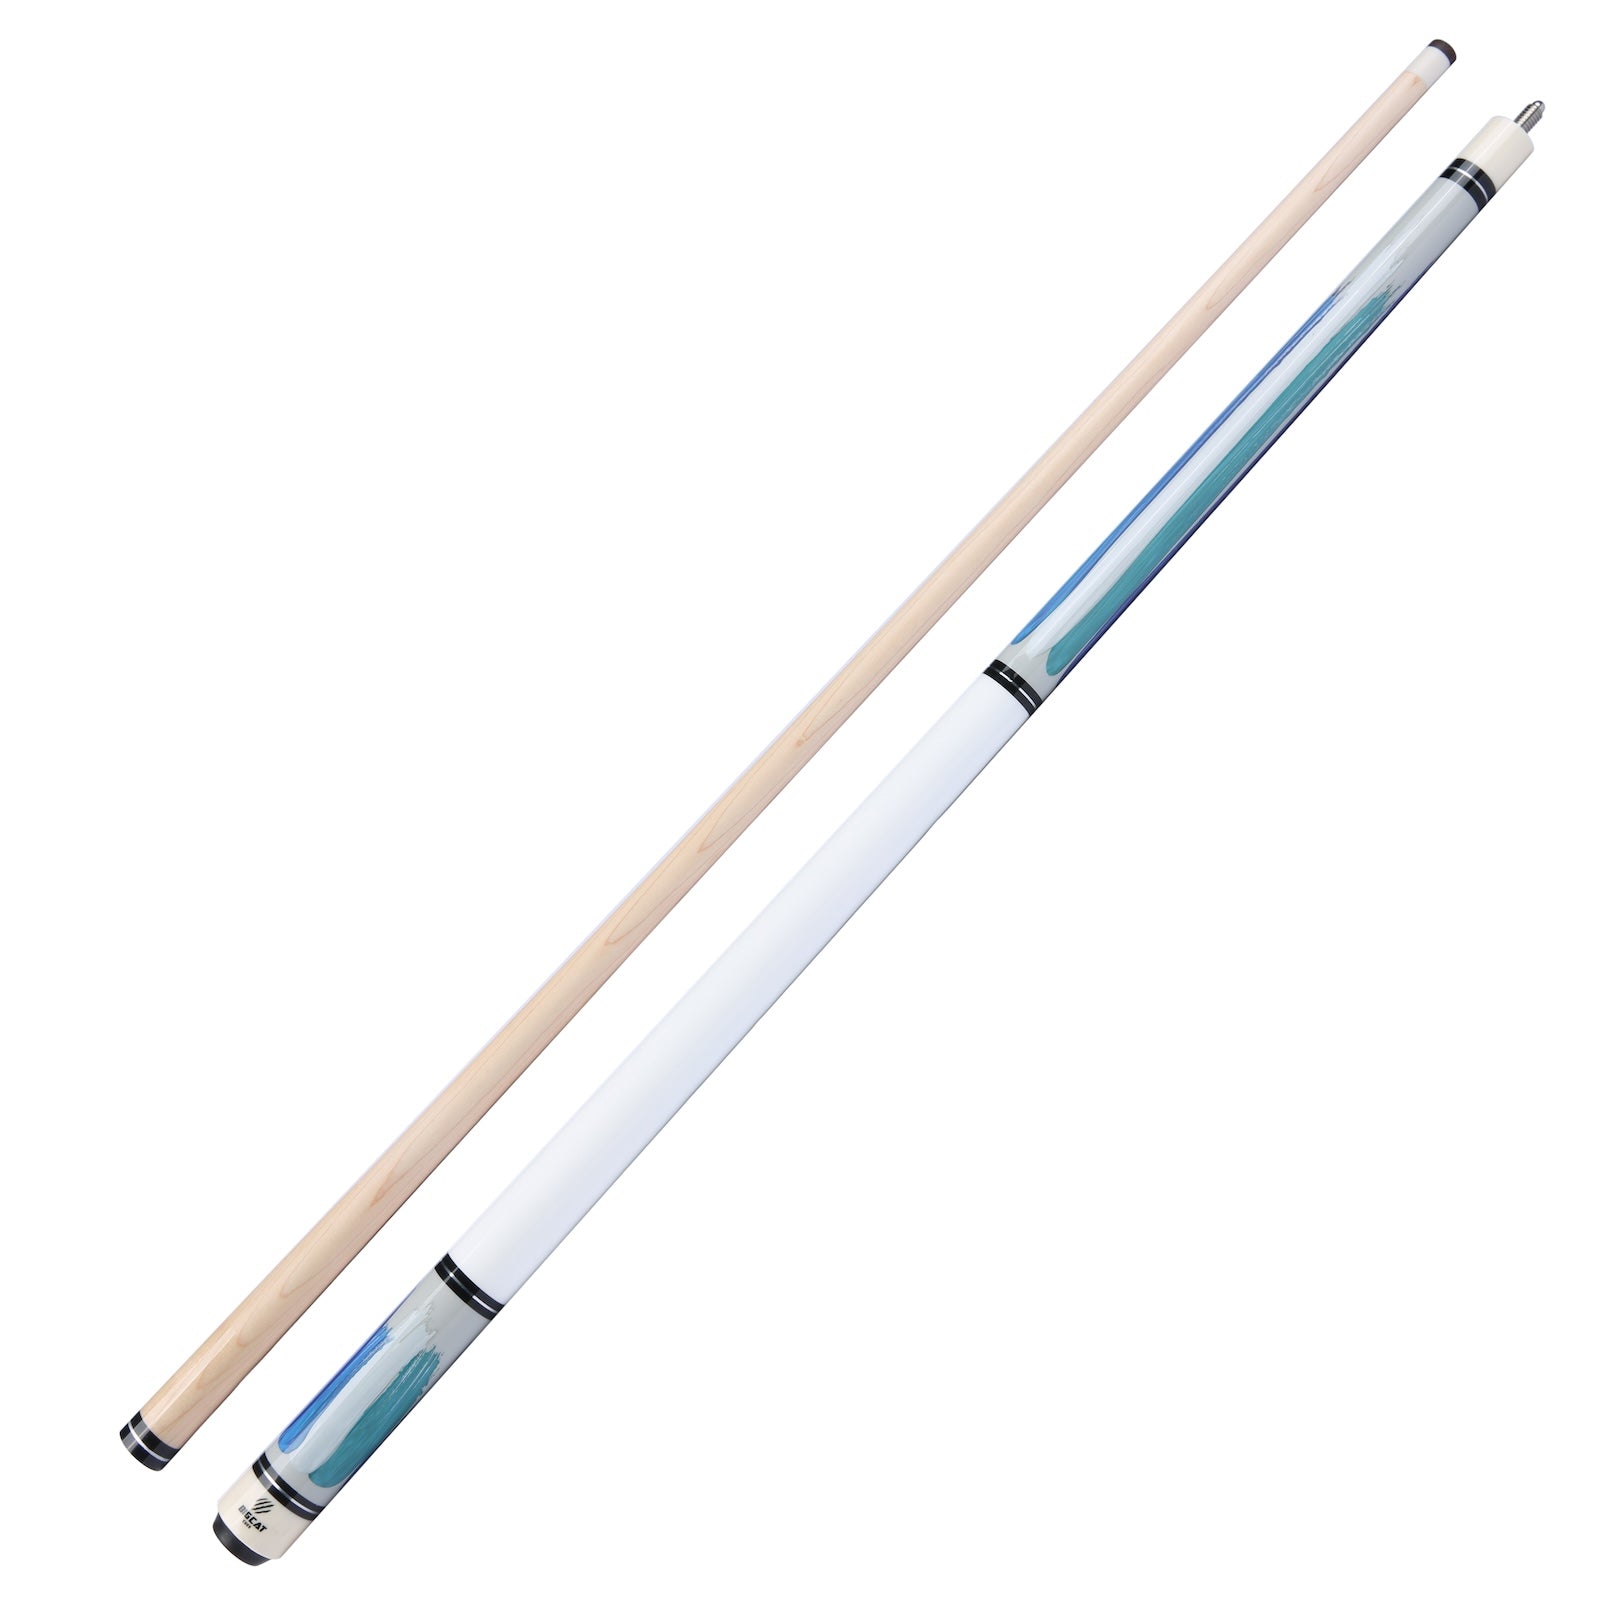 Big Cat Paint II Dynamite Blue  Pool Cue Stick - 18/19/20/21 oz, Big Cat Professional Leather tip, 12.5mm, 58" Length, Billiard Pool Cue Sticks for Men, Ideal for Home or Commercial/Bar Settings, Premium Quality Grade A Canadian Maple